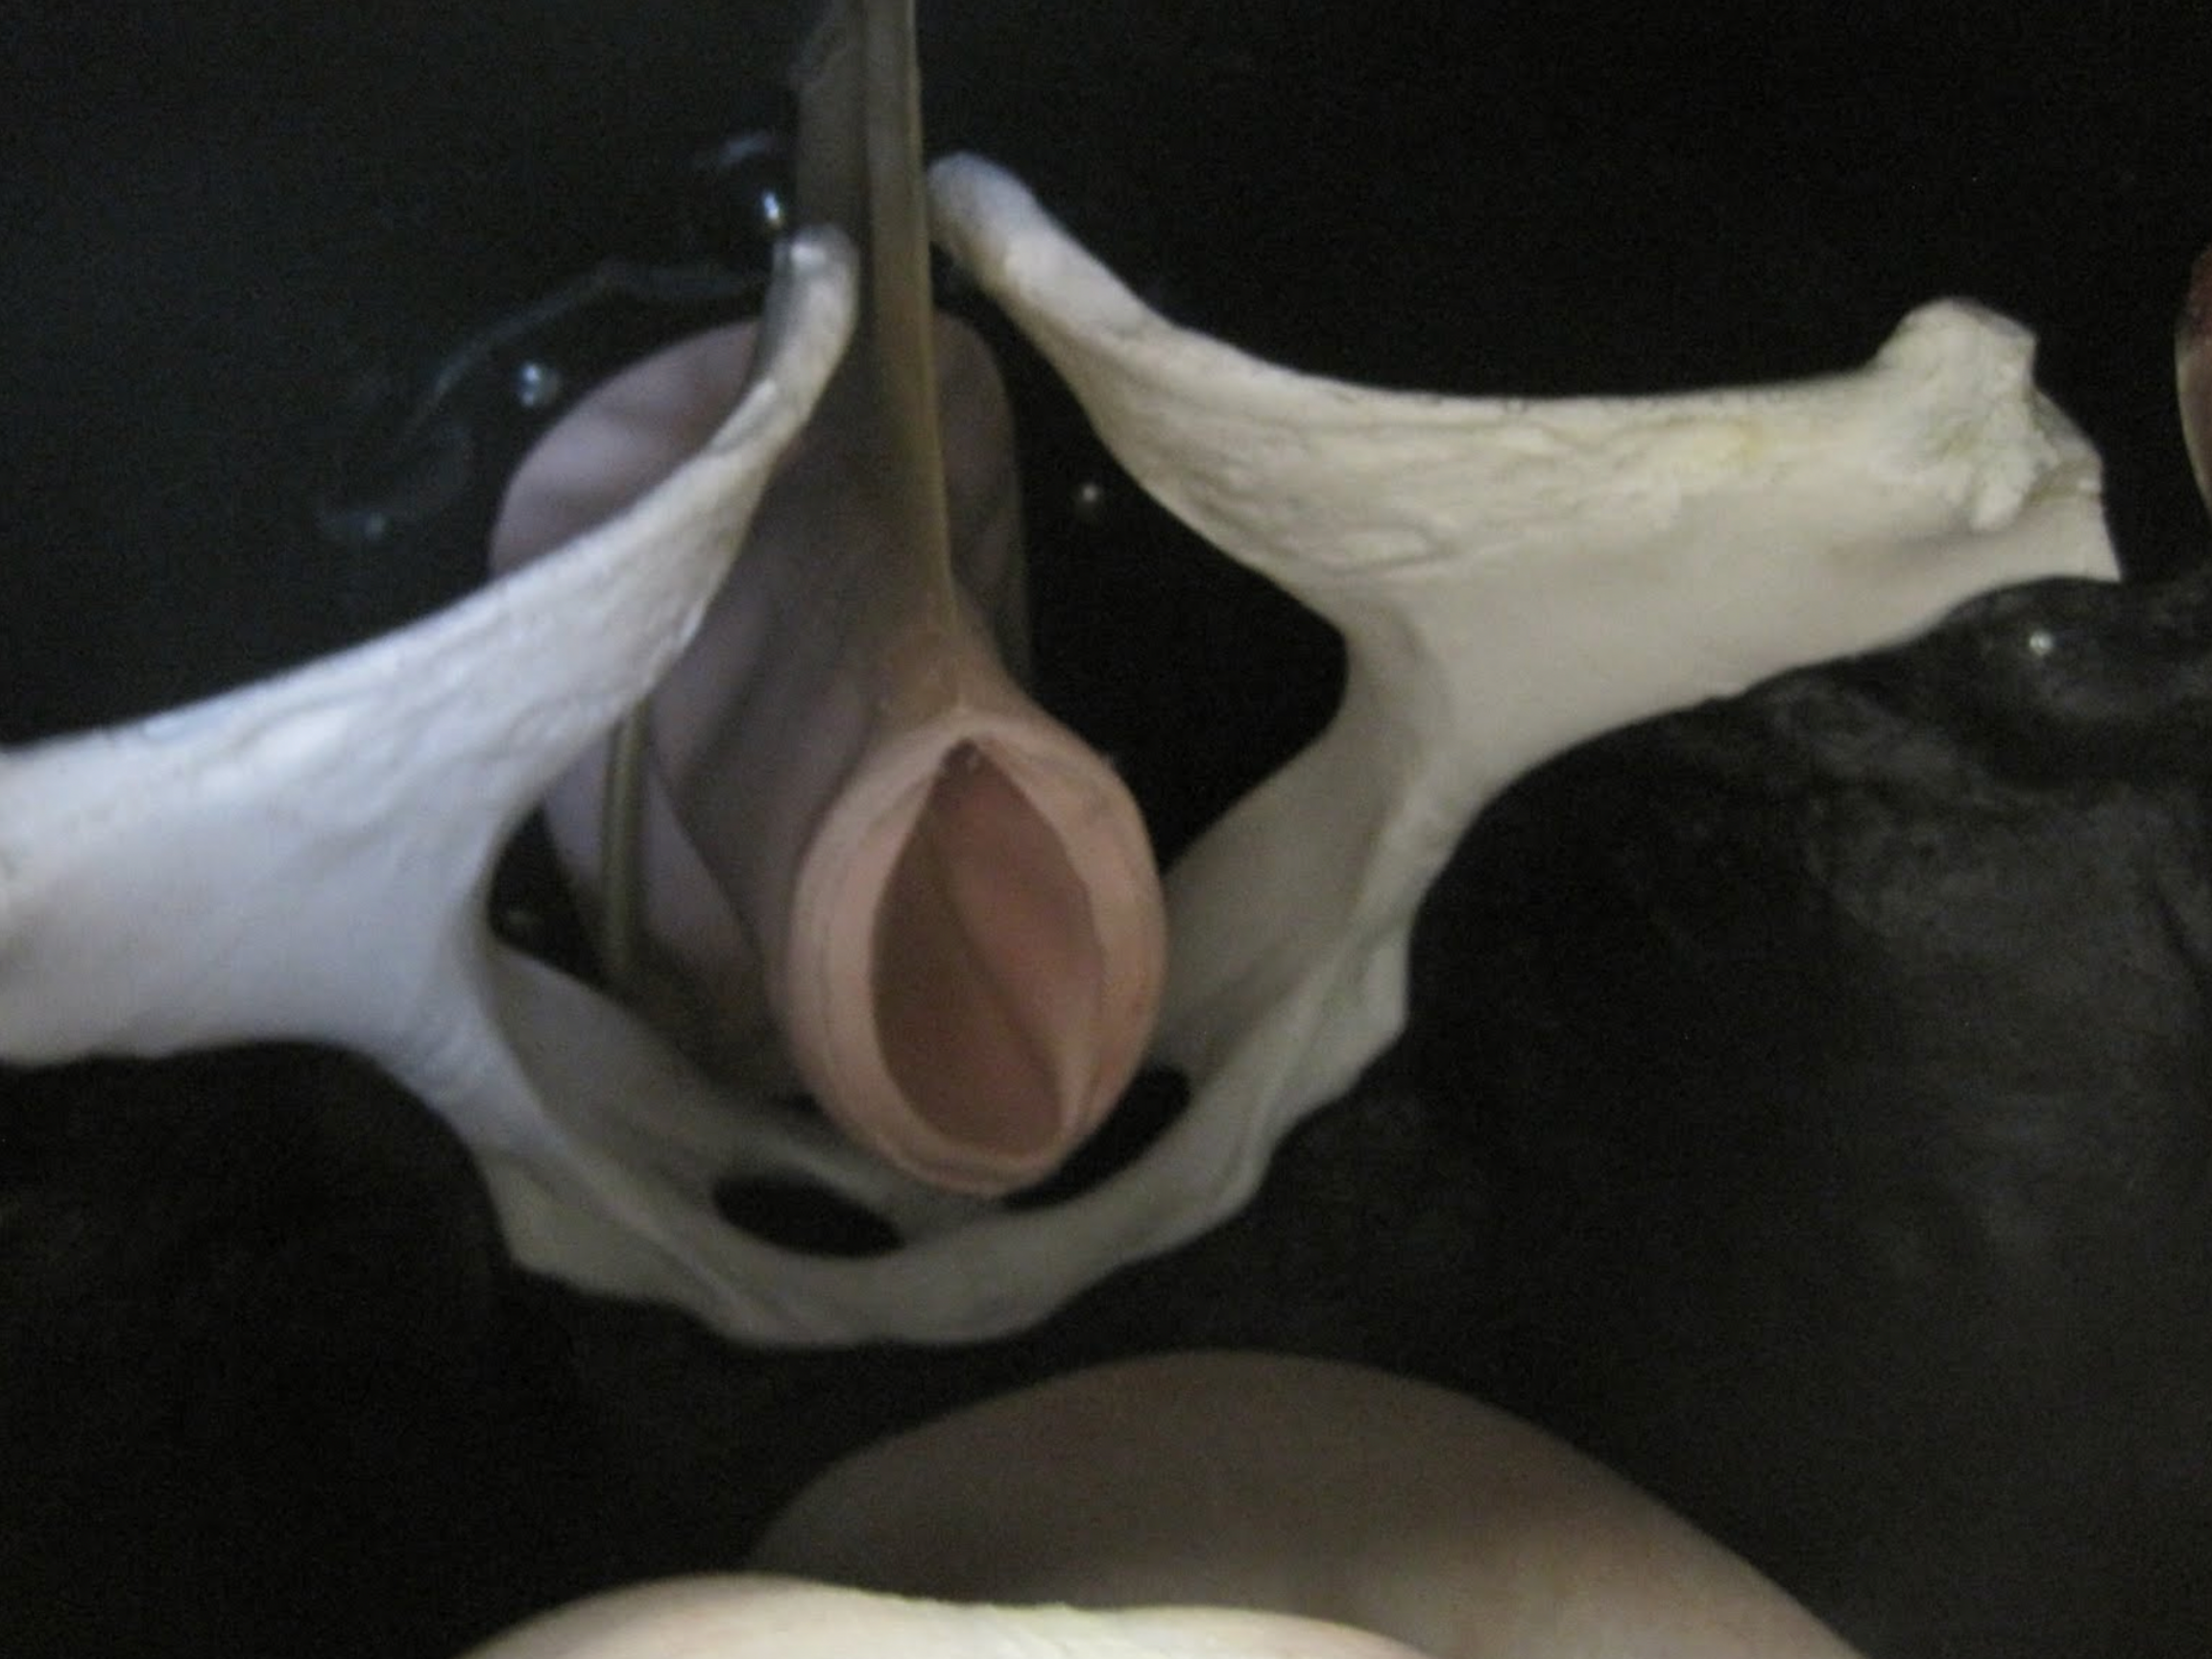 Interior view of the pelvis and inflatable rectum, with supporting membrane.